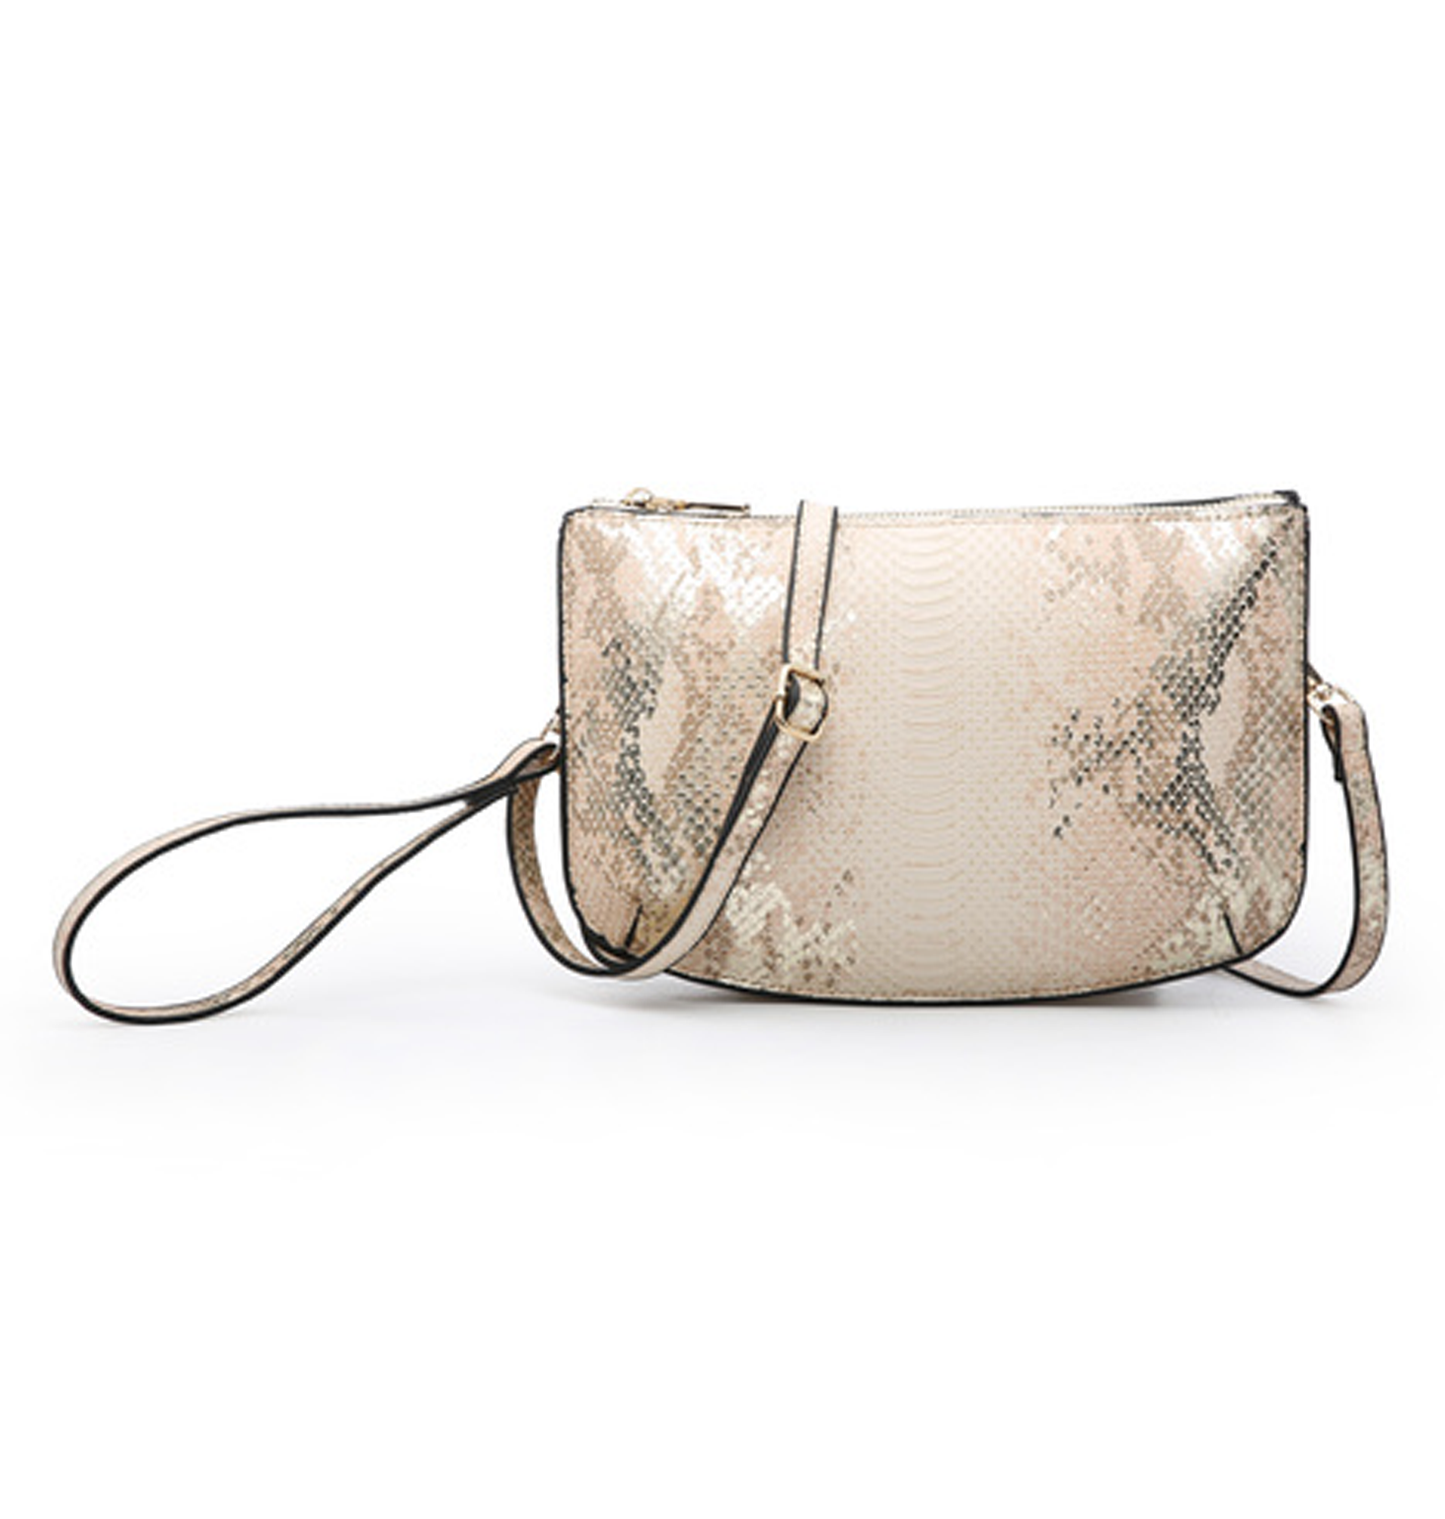 Mila Crossbody/Clutch with Dual Compartment - Light Peach - Southern Grace Creations